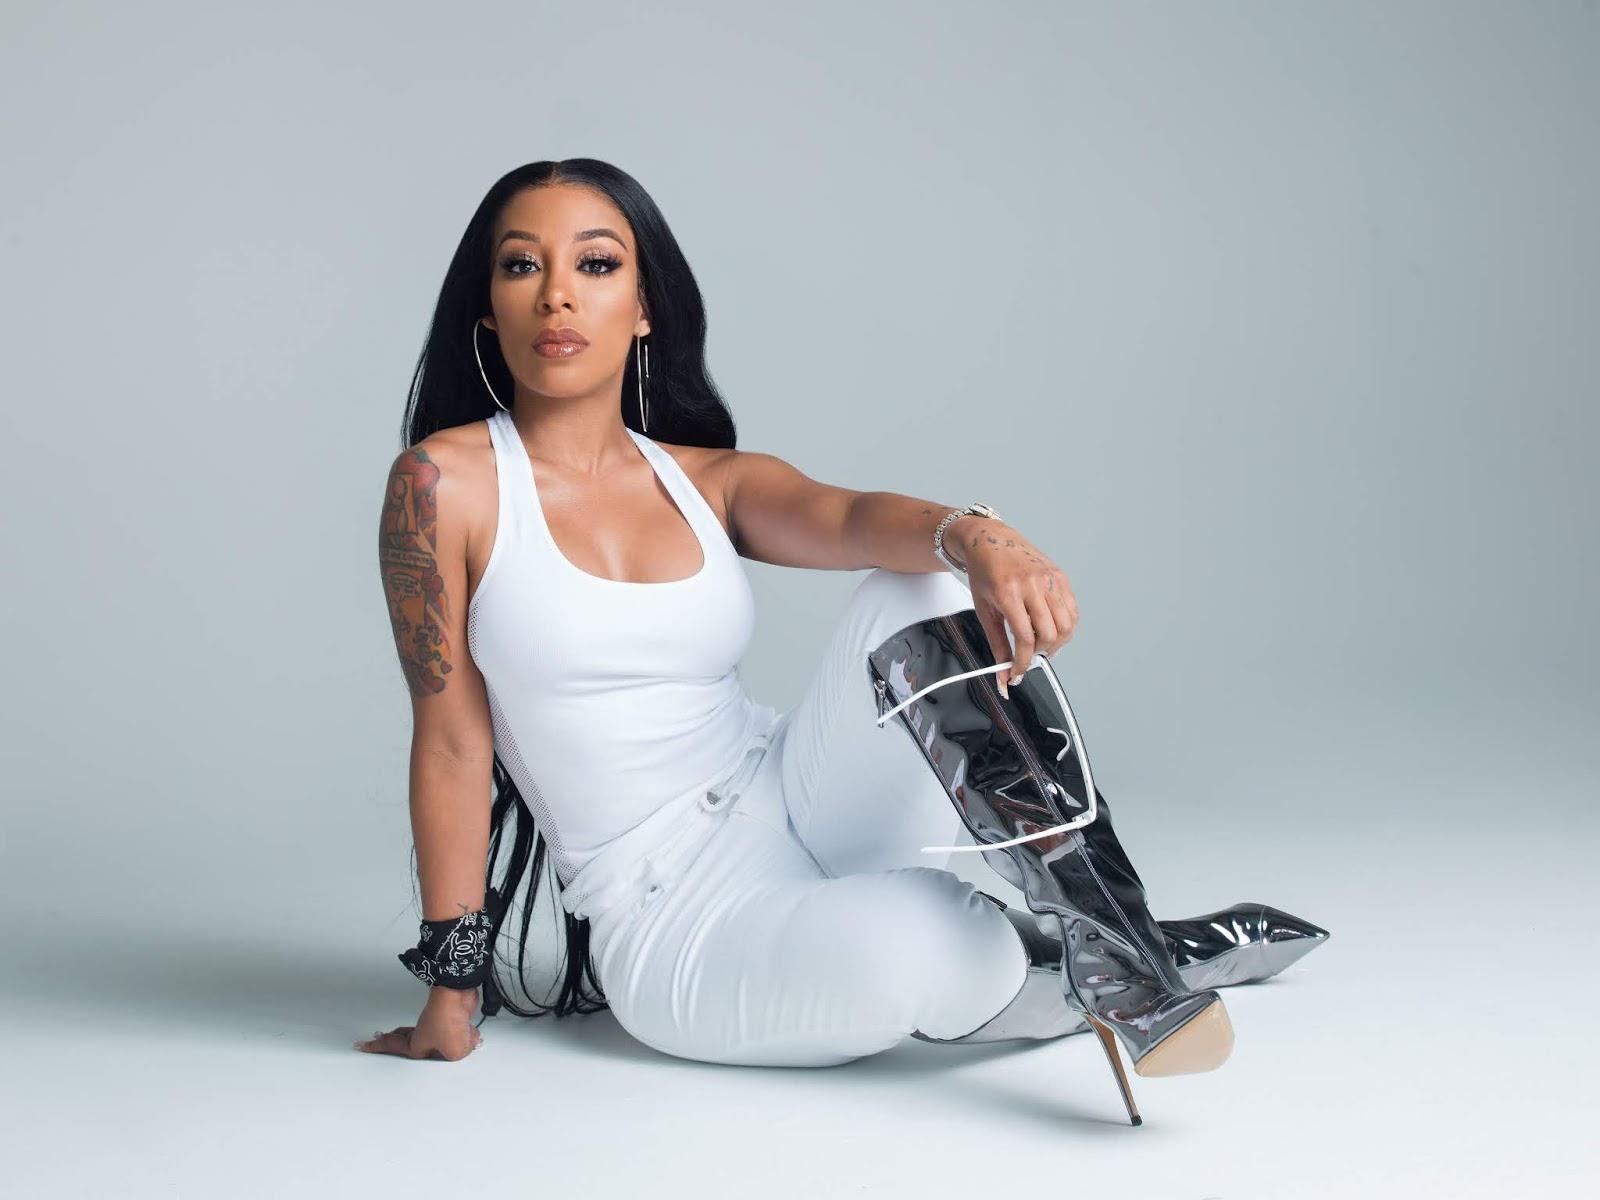 WATCH K.MICHELLE PERFORM AT THE 2019 SOUL TRAIN AWARDS